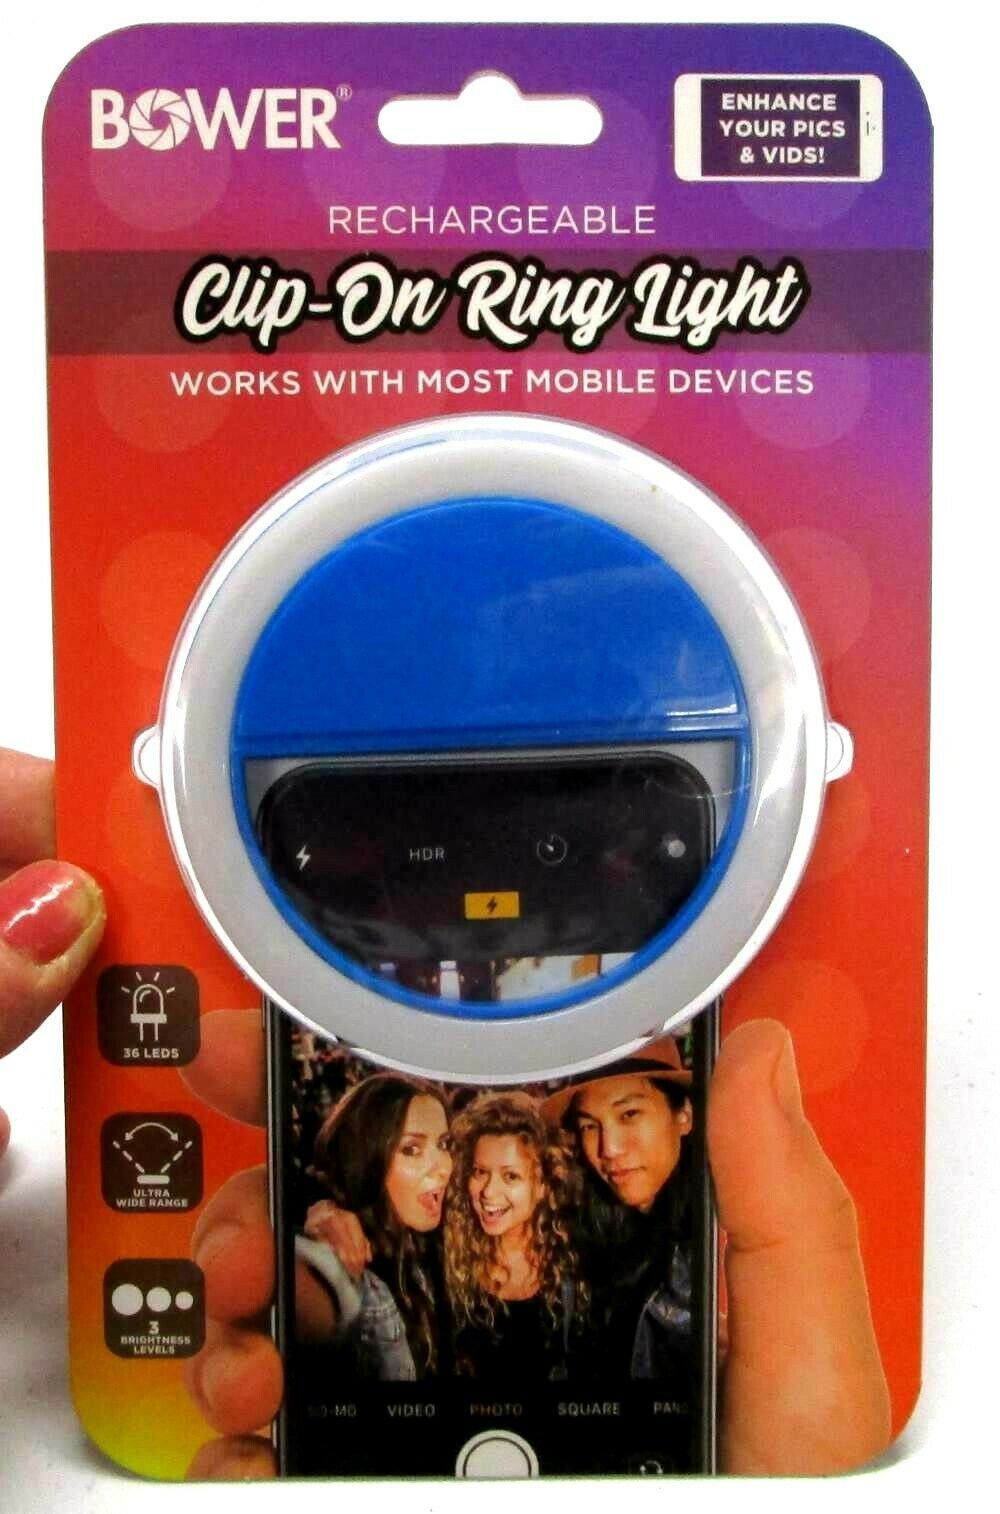 Mobile Bower Rechargeable Clip-On Ring Light 36 LEDs with 3 Brightness Levels